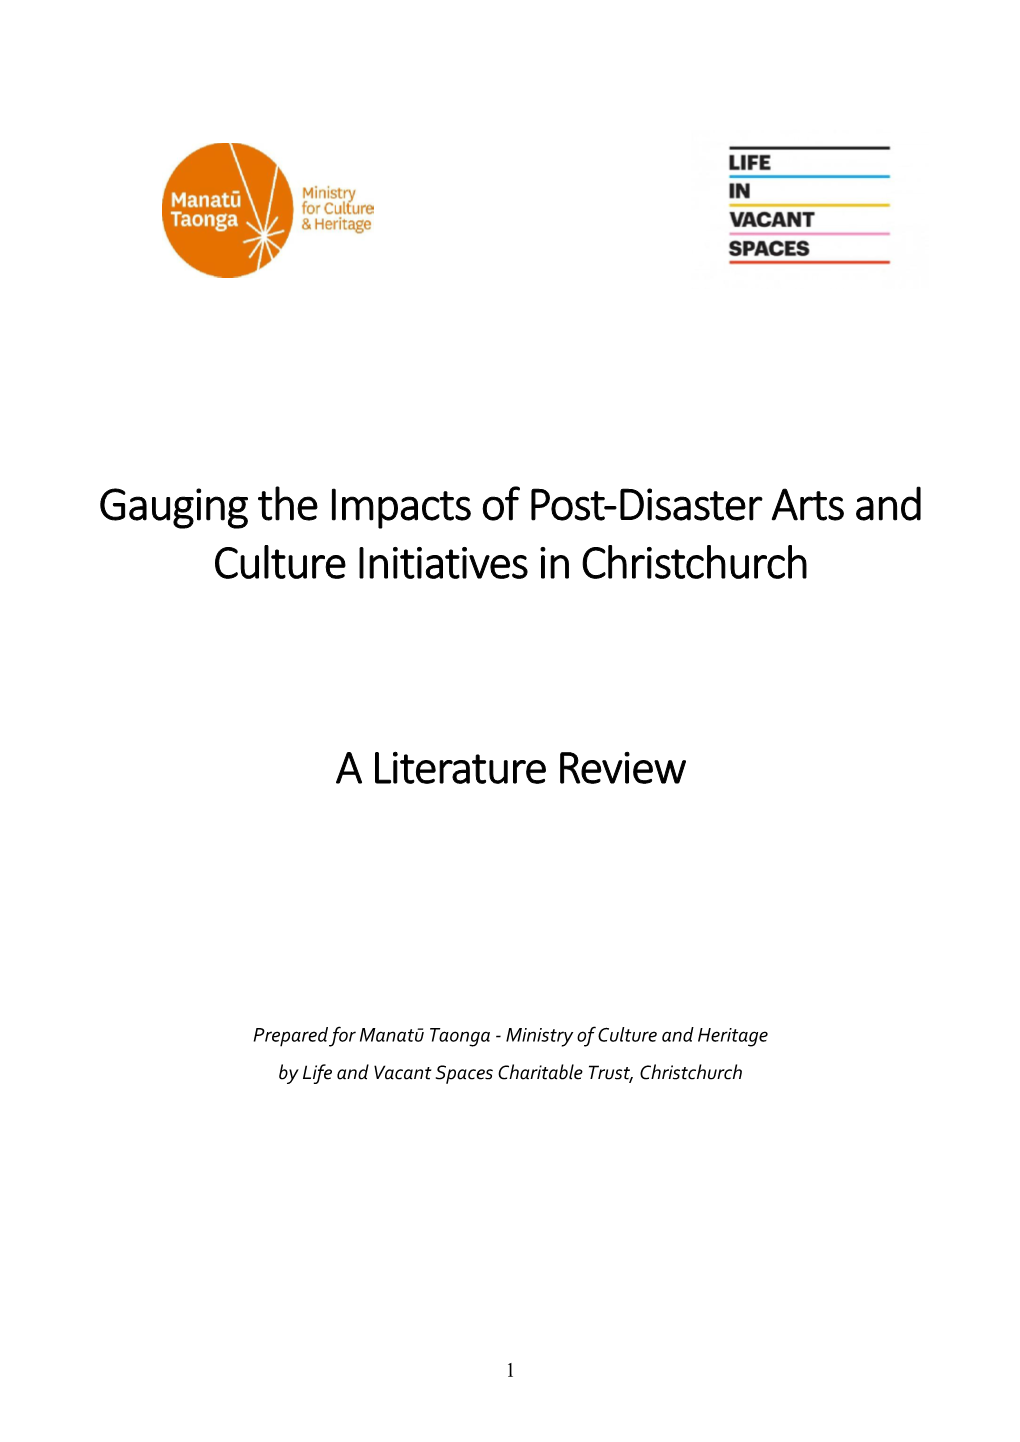 Gauging the Impacts of Post-Disaster Arts and Culture Initiatives in Christchurch